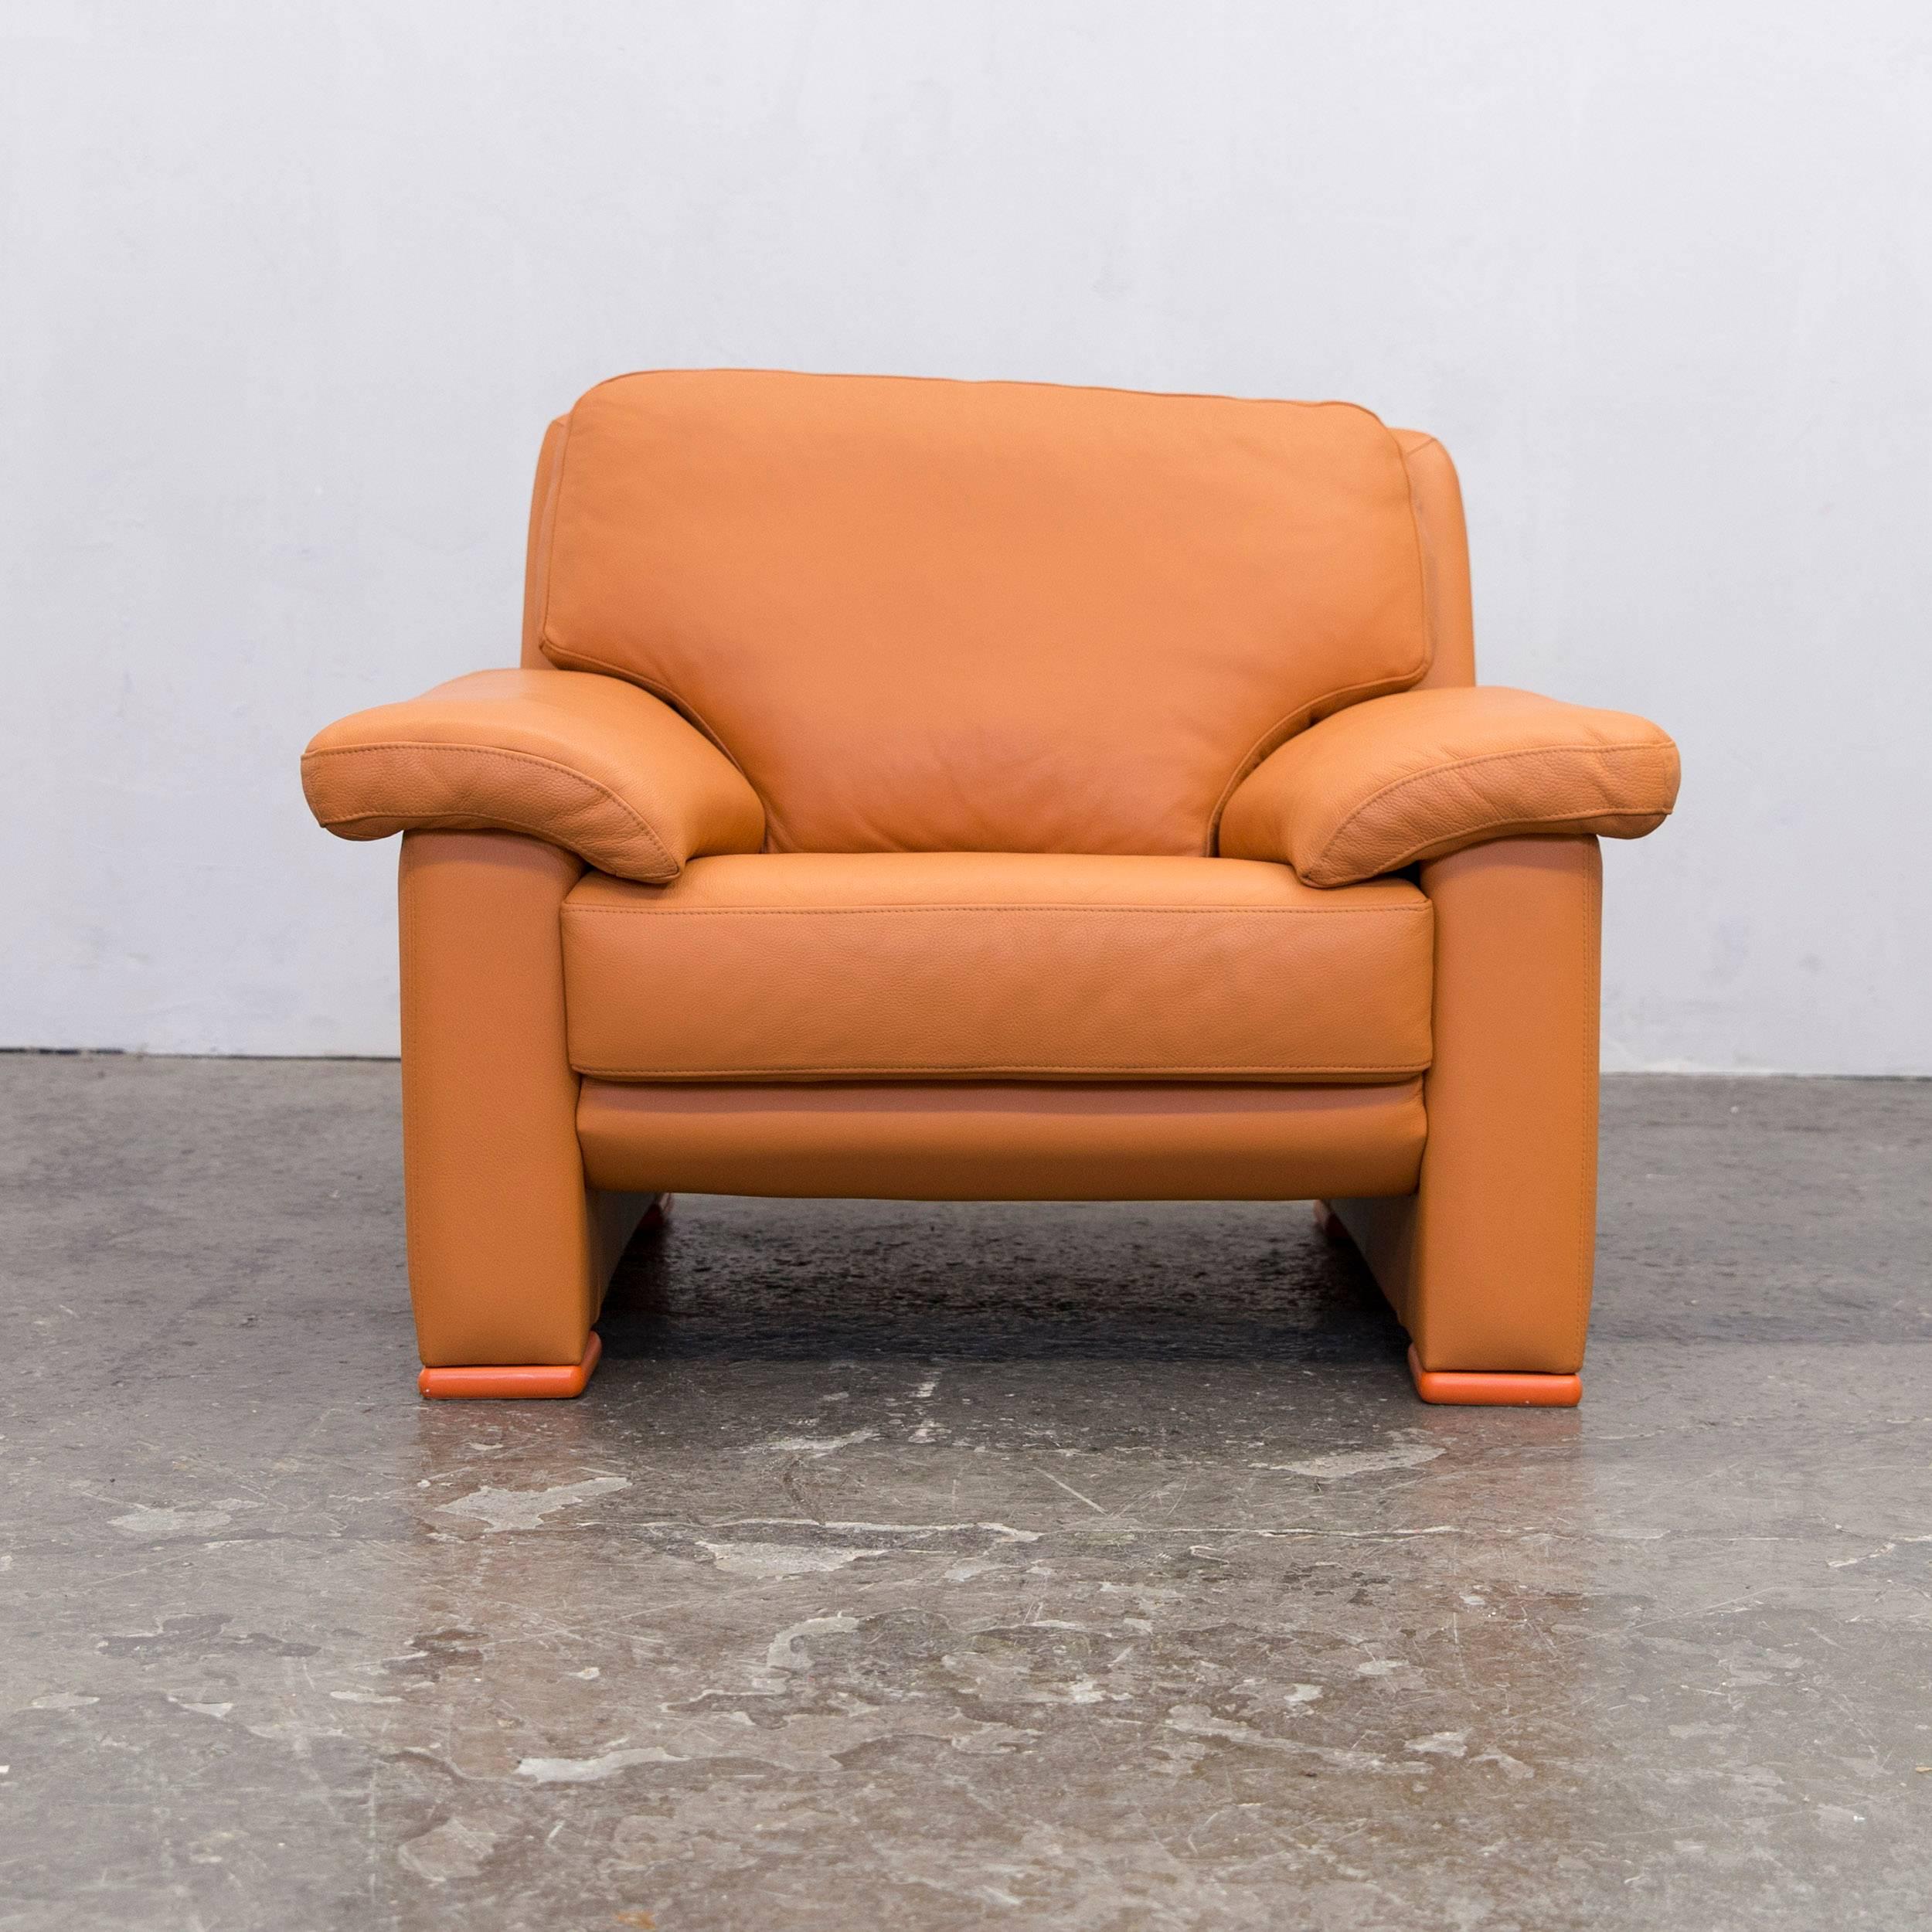 Orange colored designer leather chair in a minimalistic design, made for pure comfort.
Desgined and manufactured by Willi Schillig.